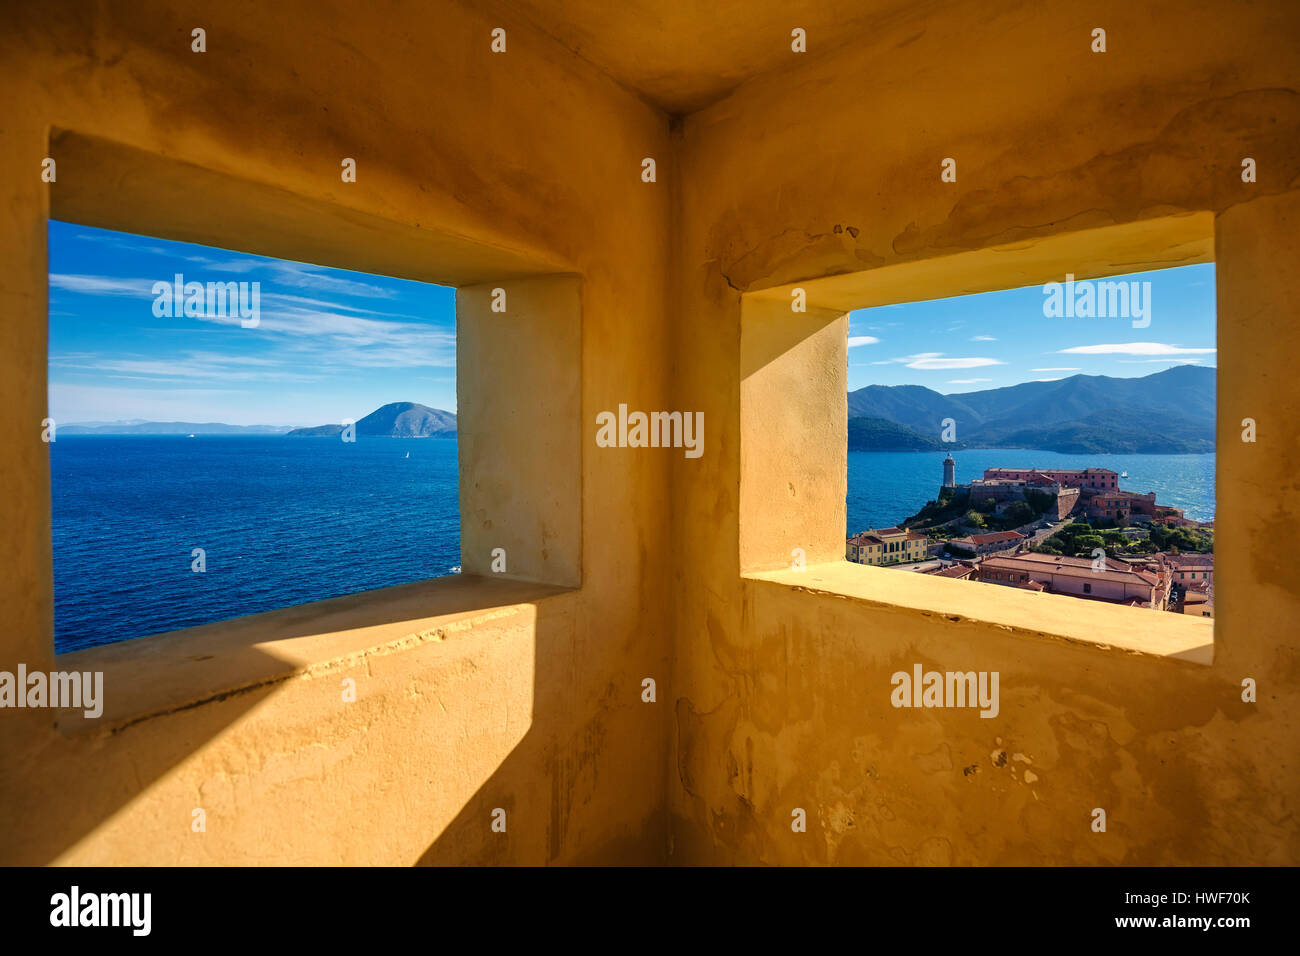 Elba island, Portoferraio aerial view from old windows, Lighthouse and fort. Tuscany, Italy, Europe. Stock Photo